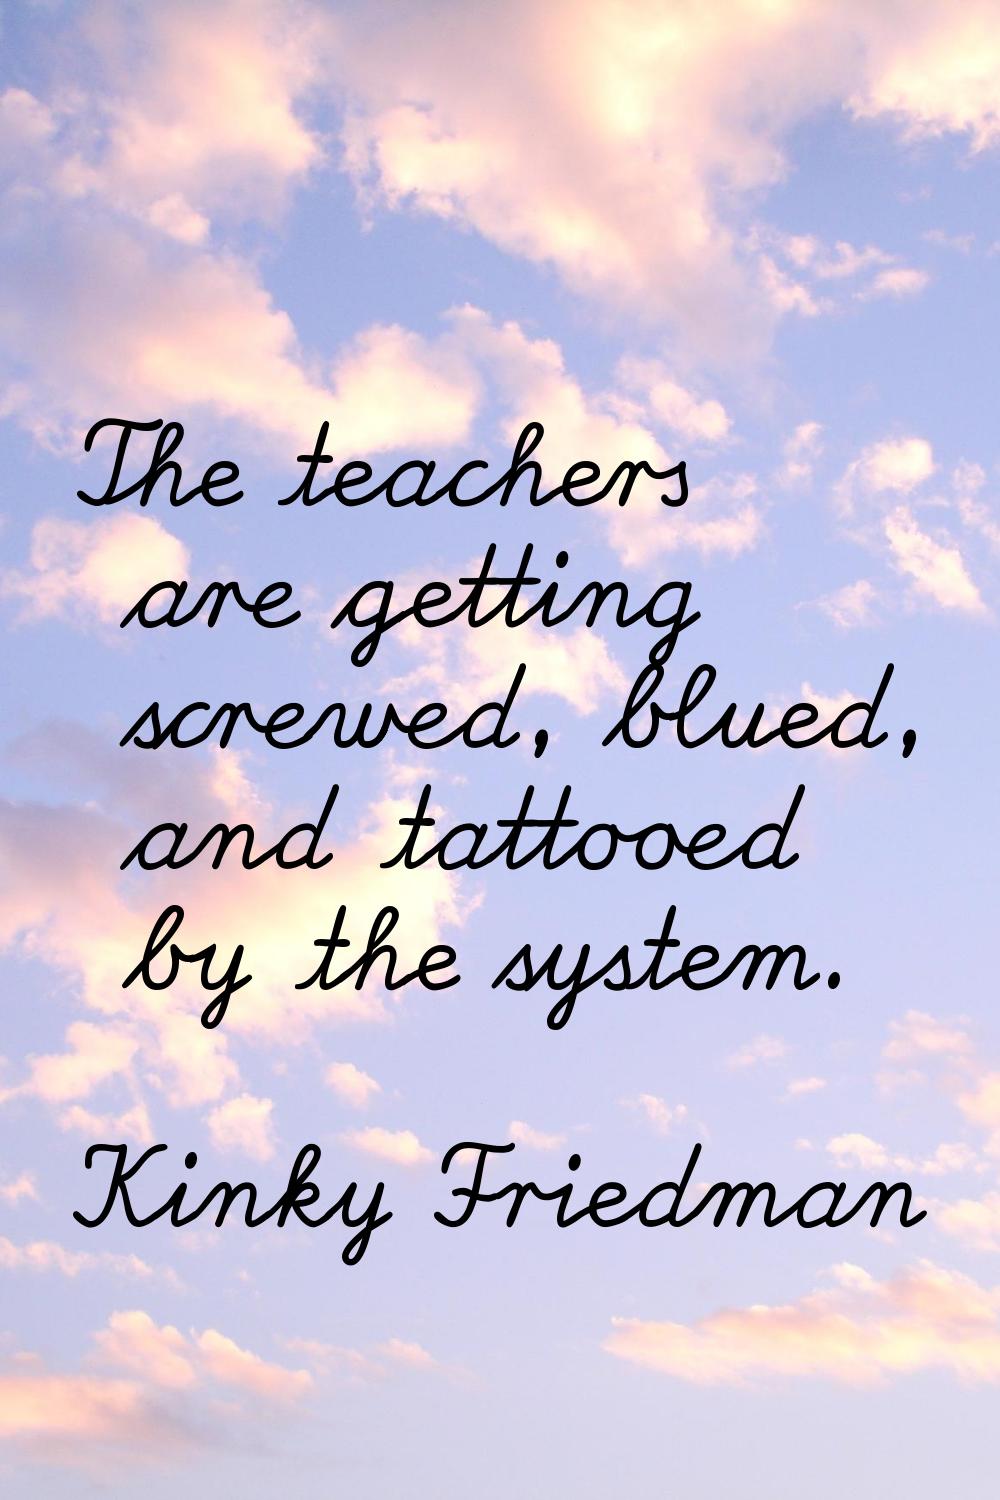 The teachers are getting screwed, blued, and tattooed by the system.